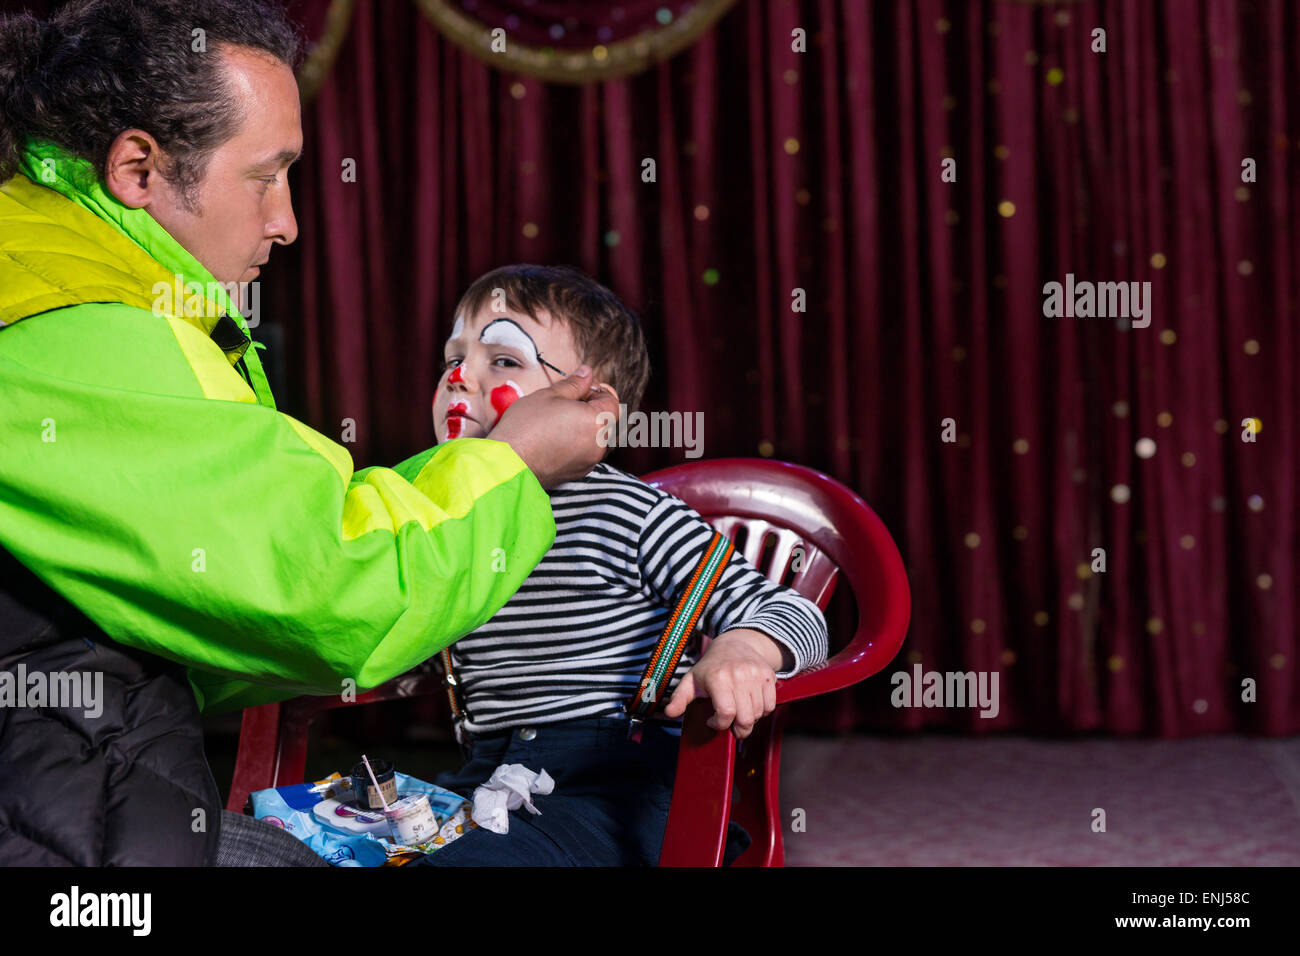 Boy Sitting in Chair on Empty Stage Having Clown Make Up Applied to Face by Man, Boy is Looking at Camera Out of Corner of Eye Stock Photo